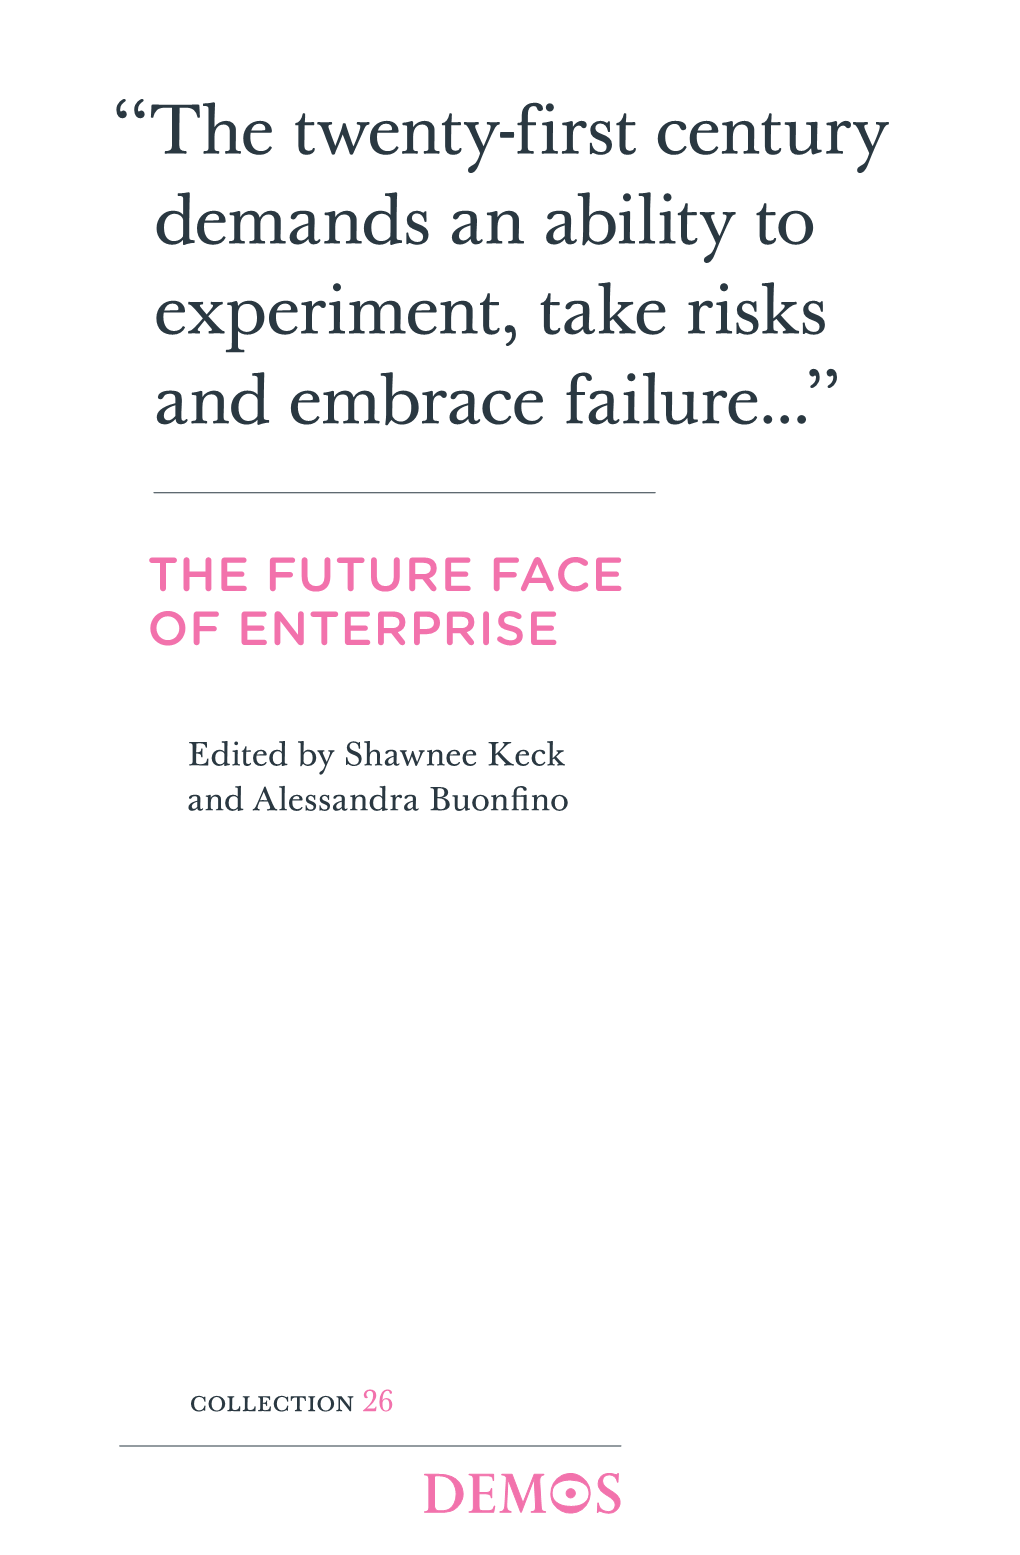 The Twenty-First Century Demands an Ability to Experiment, Take Risks and Embrace Failure...’’